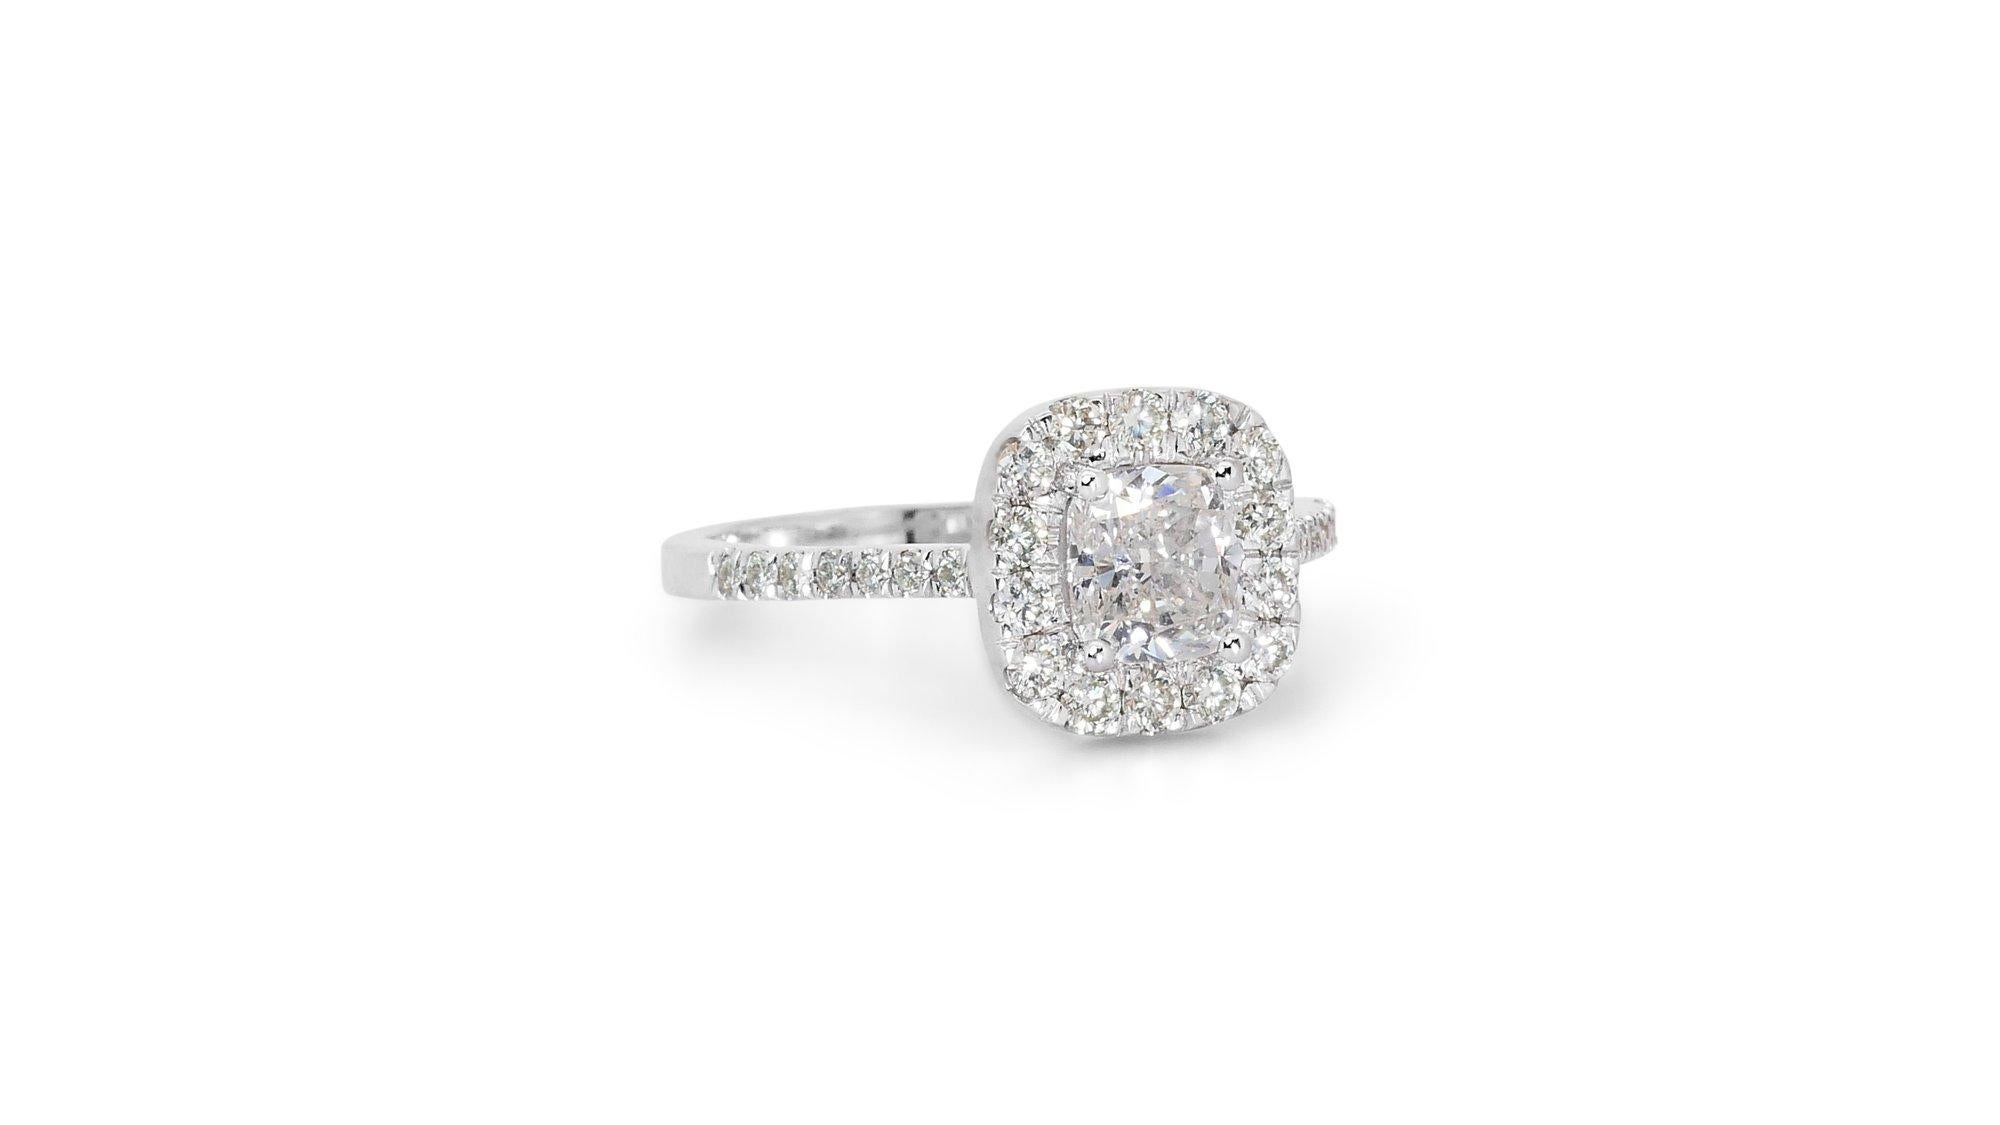 Elevate your style and express your unique sophistication with this 1.46ct Halo Pave Diamond Ring, a timeless symbol of refined taste and enduring beauty. This ideal cut diamond ring comes with a GIA Certification for it's authenticity and excellent